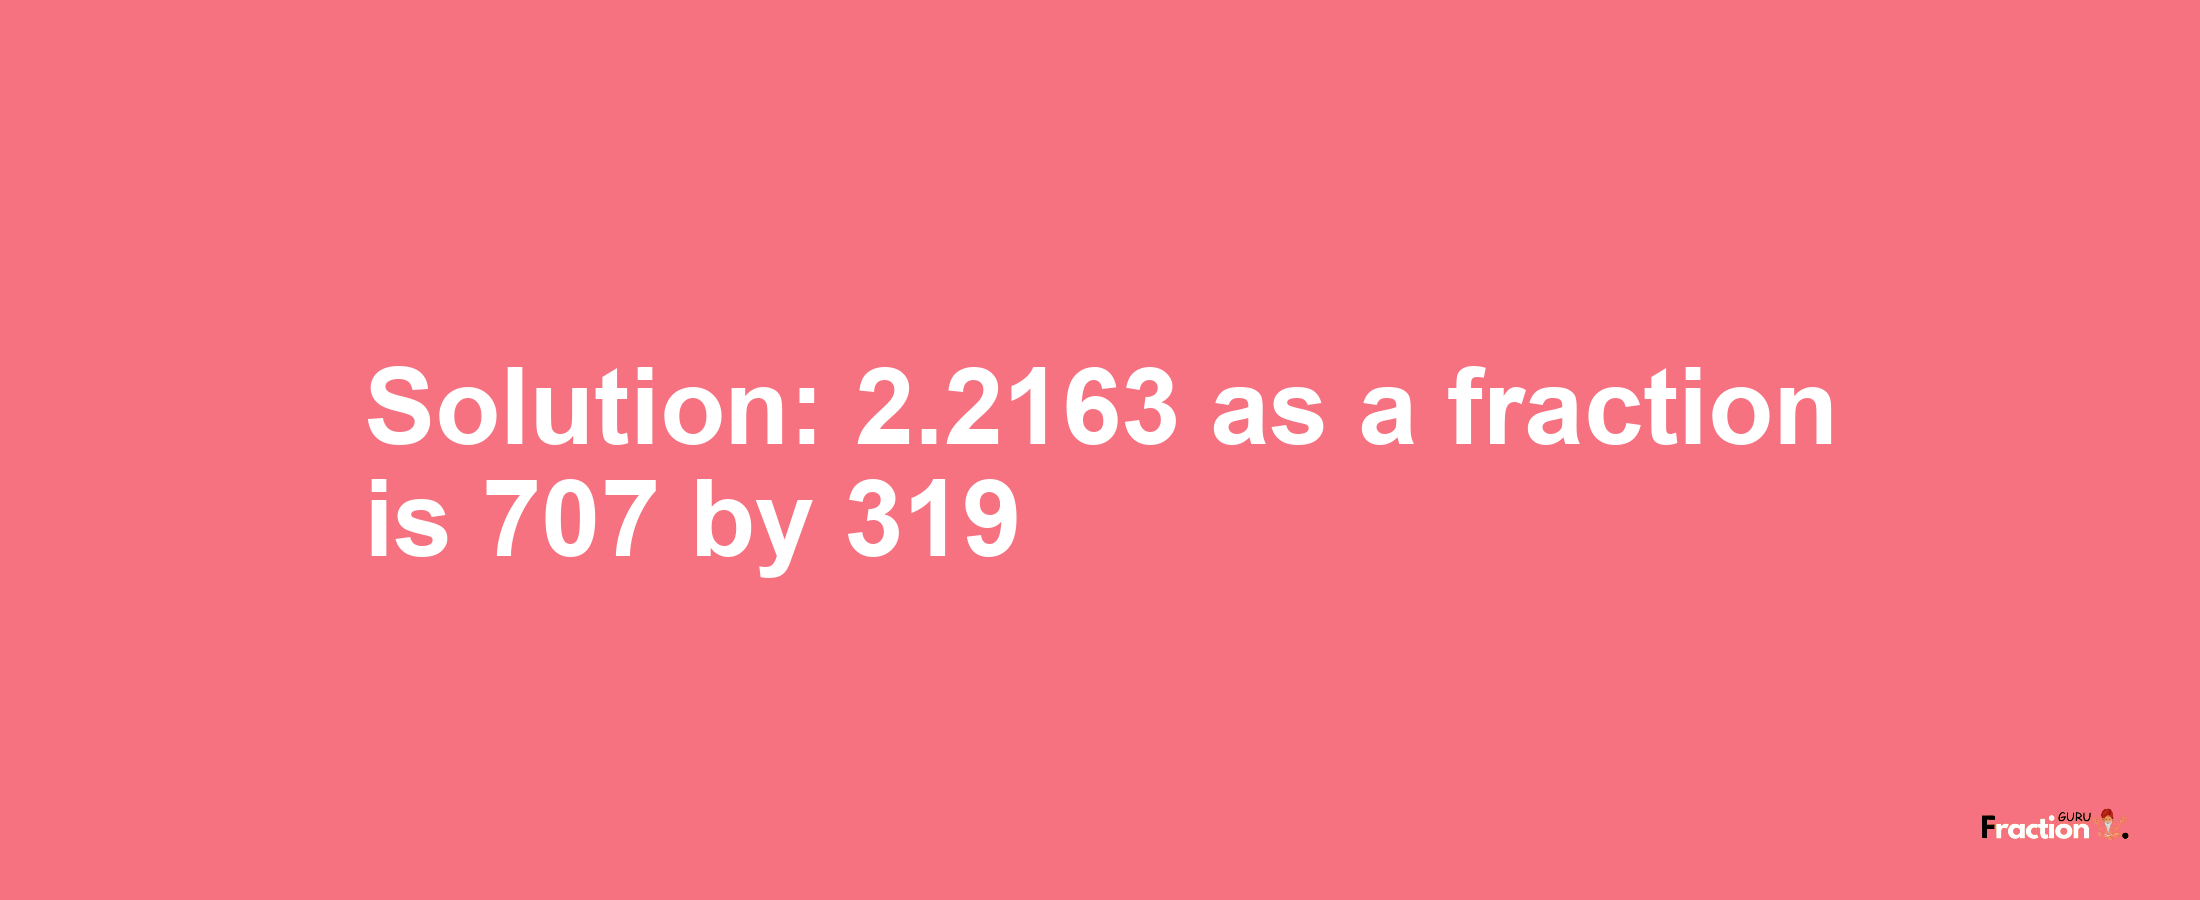 Solution:2.2163 as a fraction is 707/319